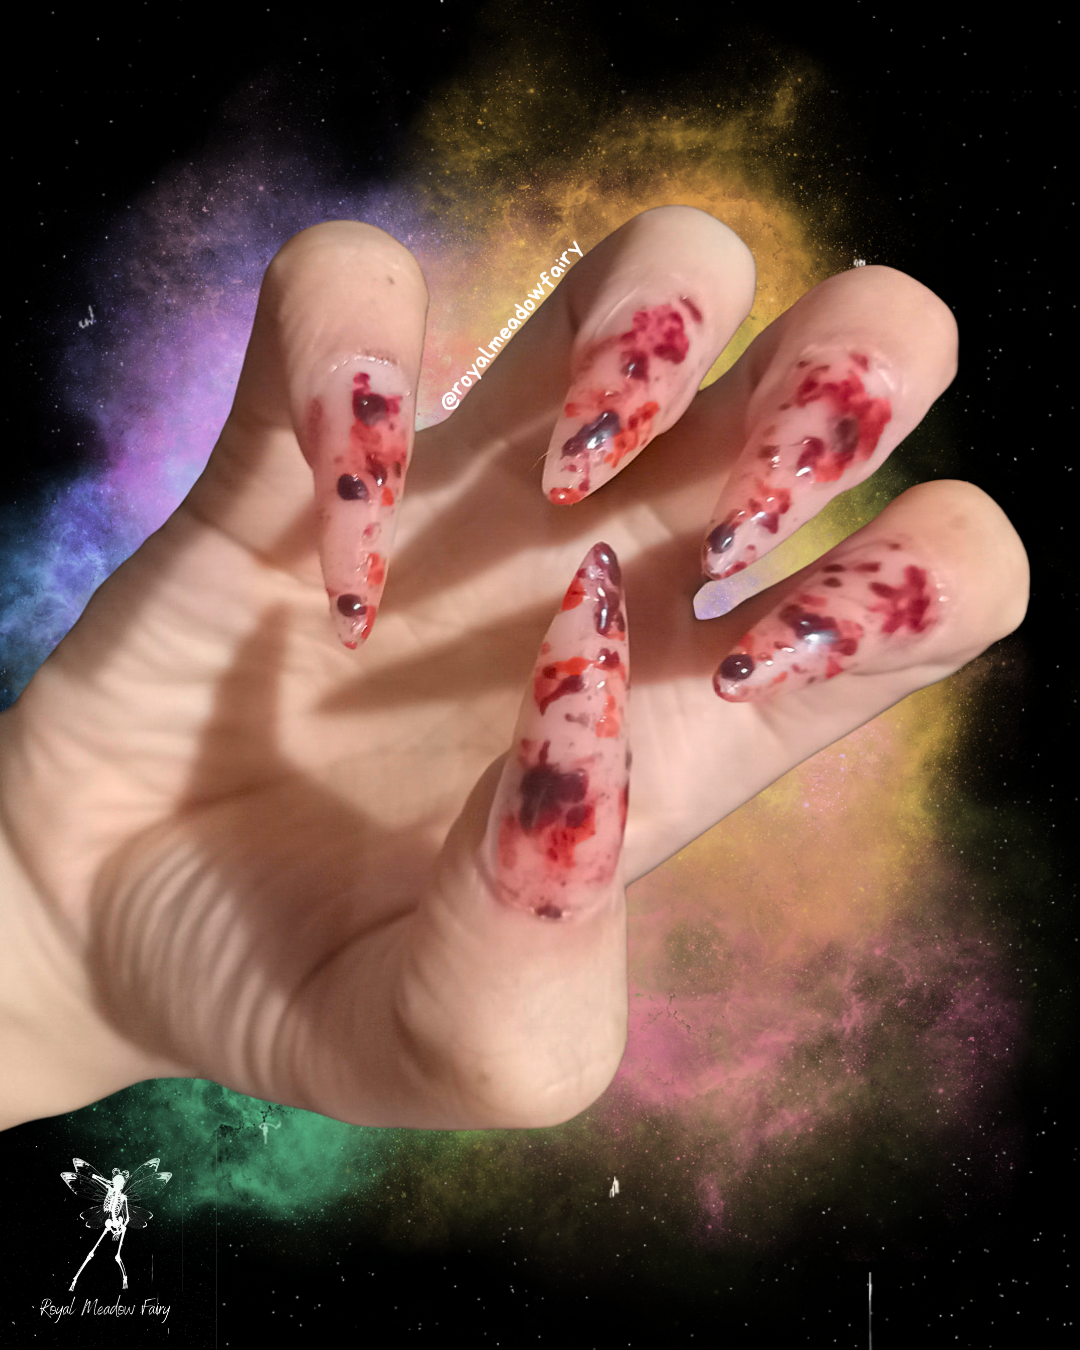 slasher movie press on nails realistic spooky horror cosplay bloody nail art design 